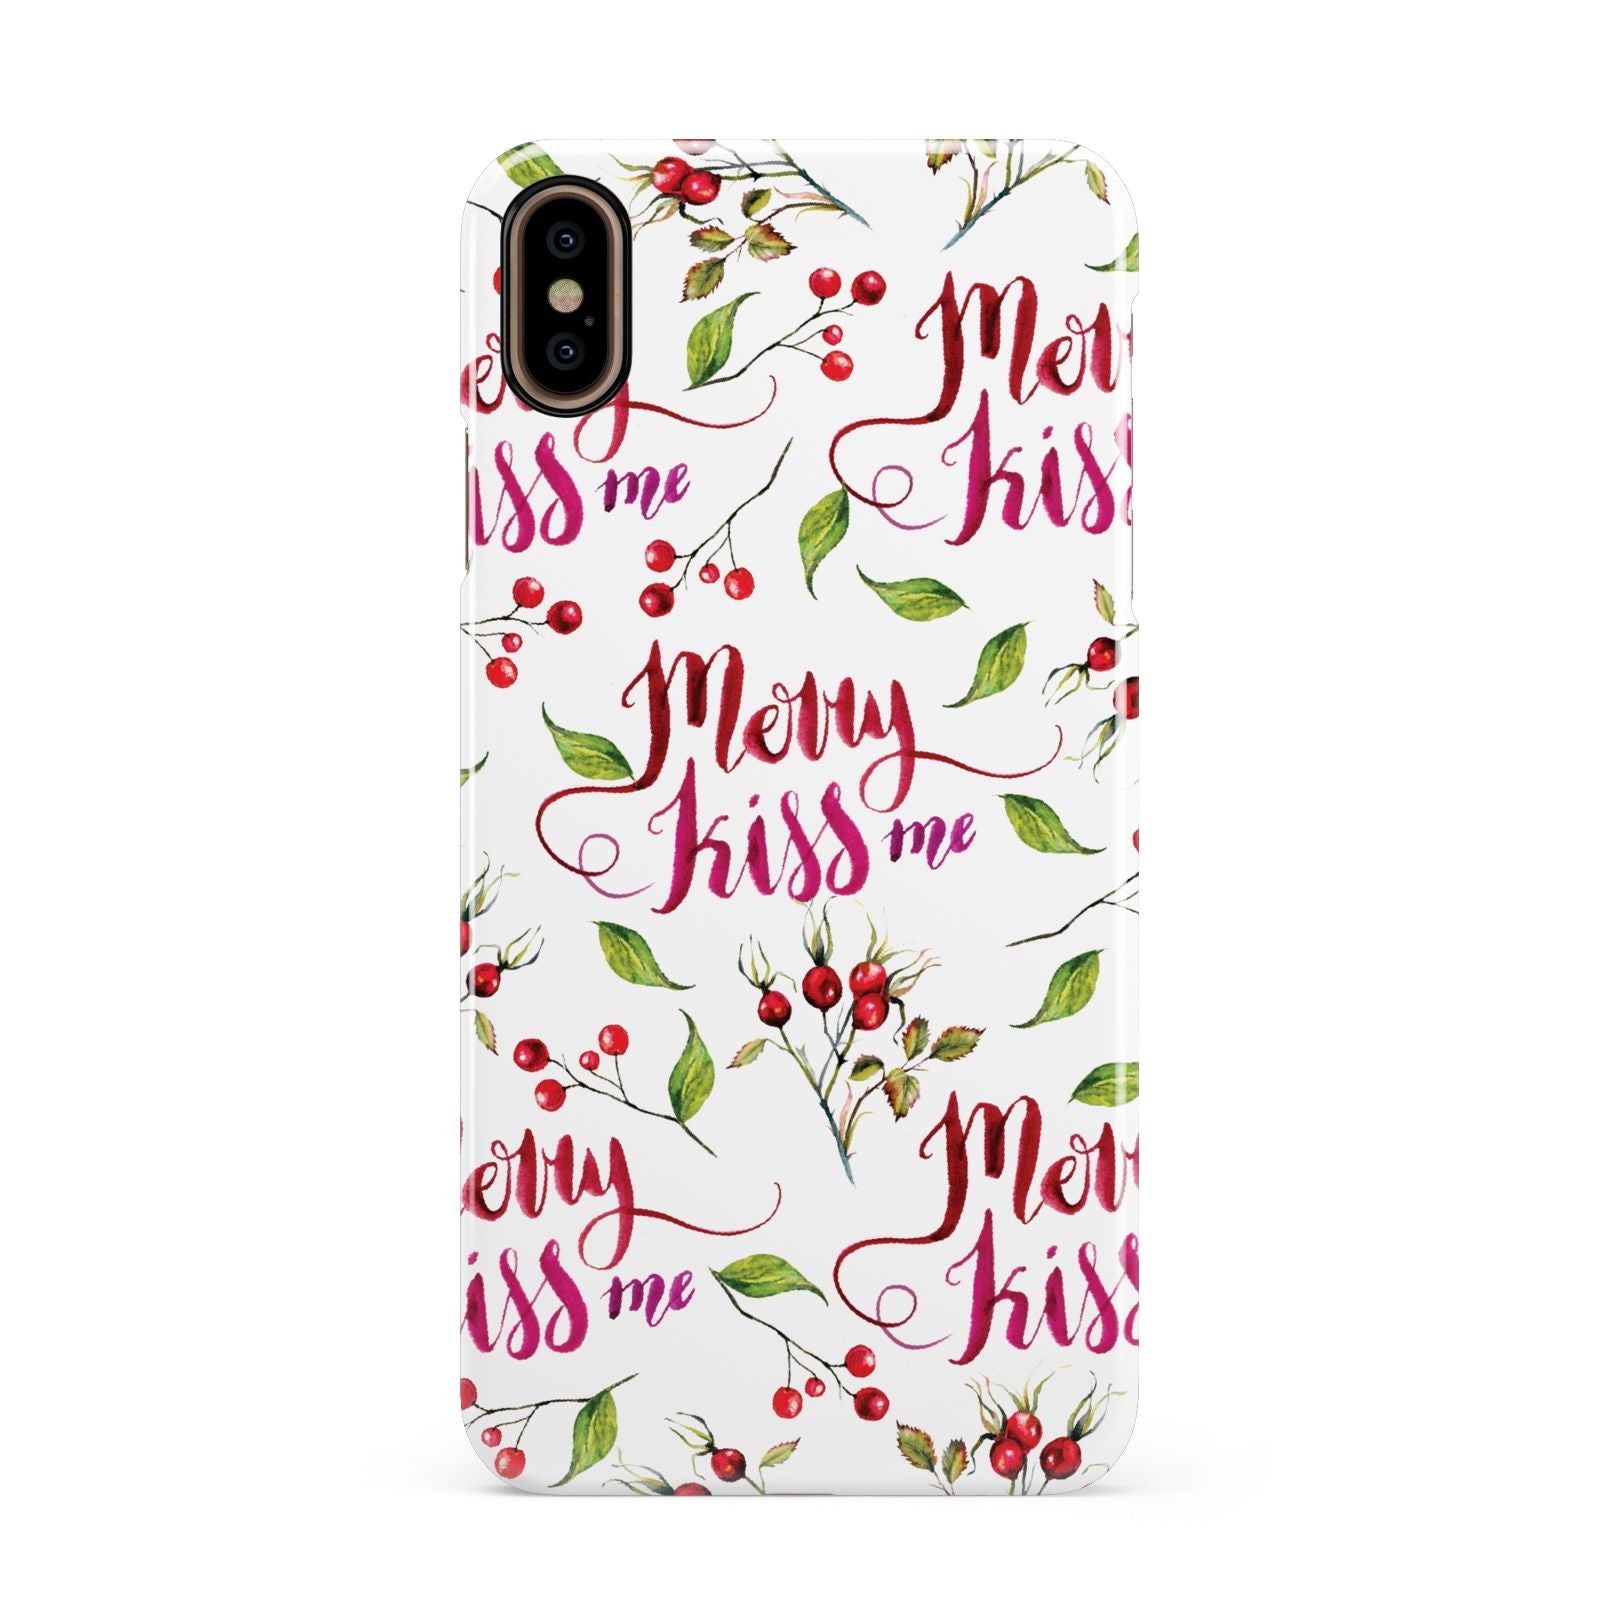 Merry kiss me Apple iPhone Xs Max 3D Snap Case